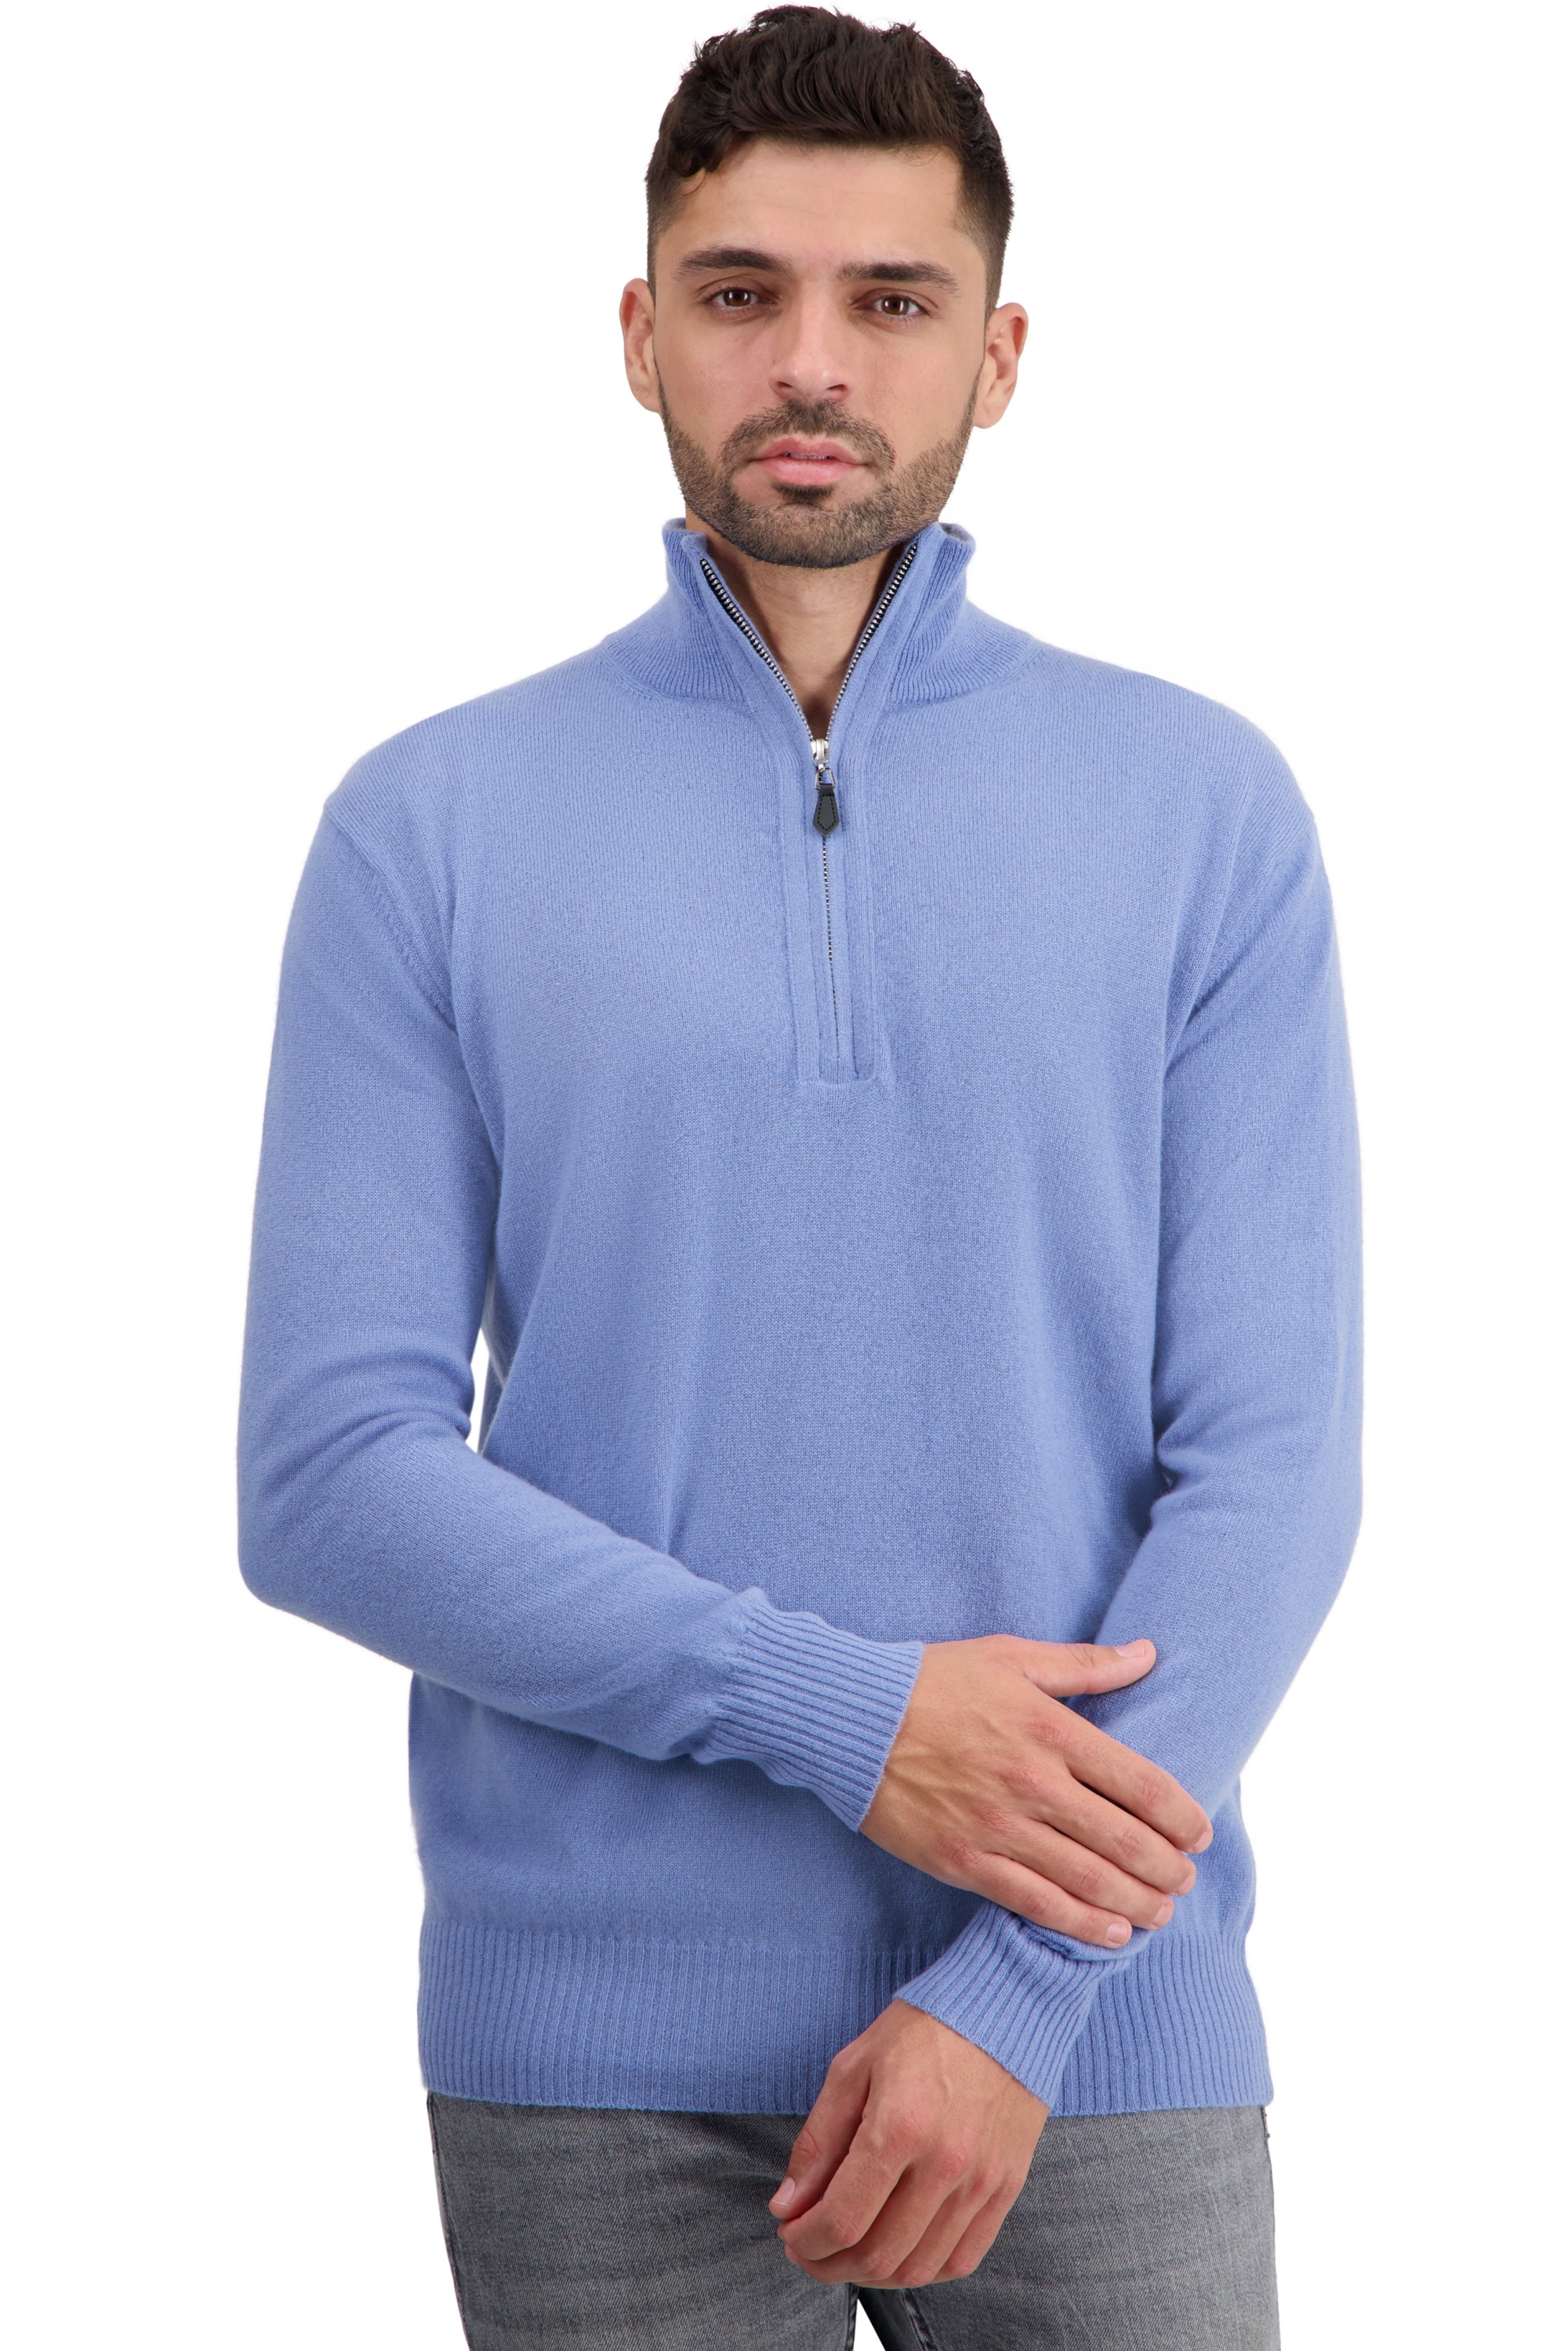 Cachemire pull homme toulon first light blue l